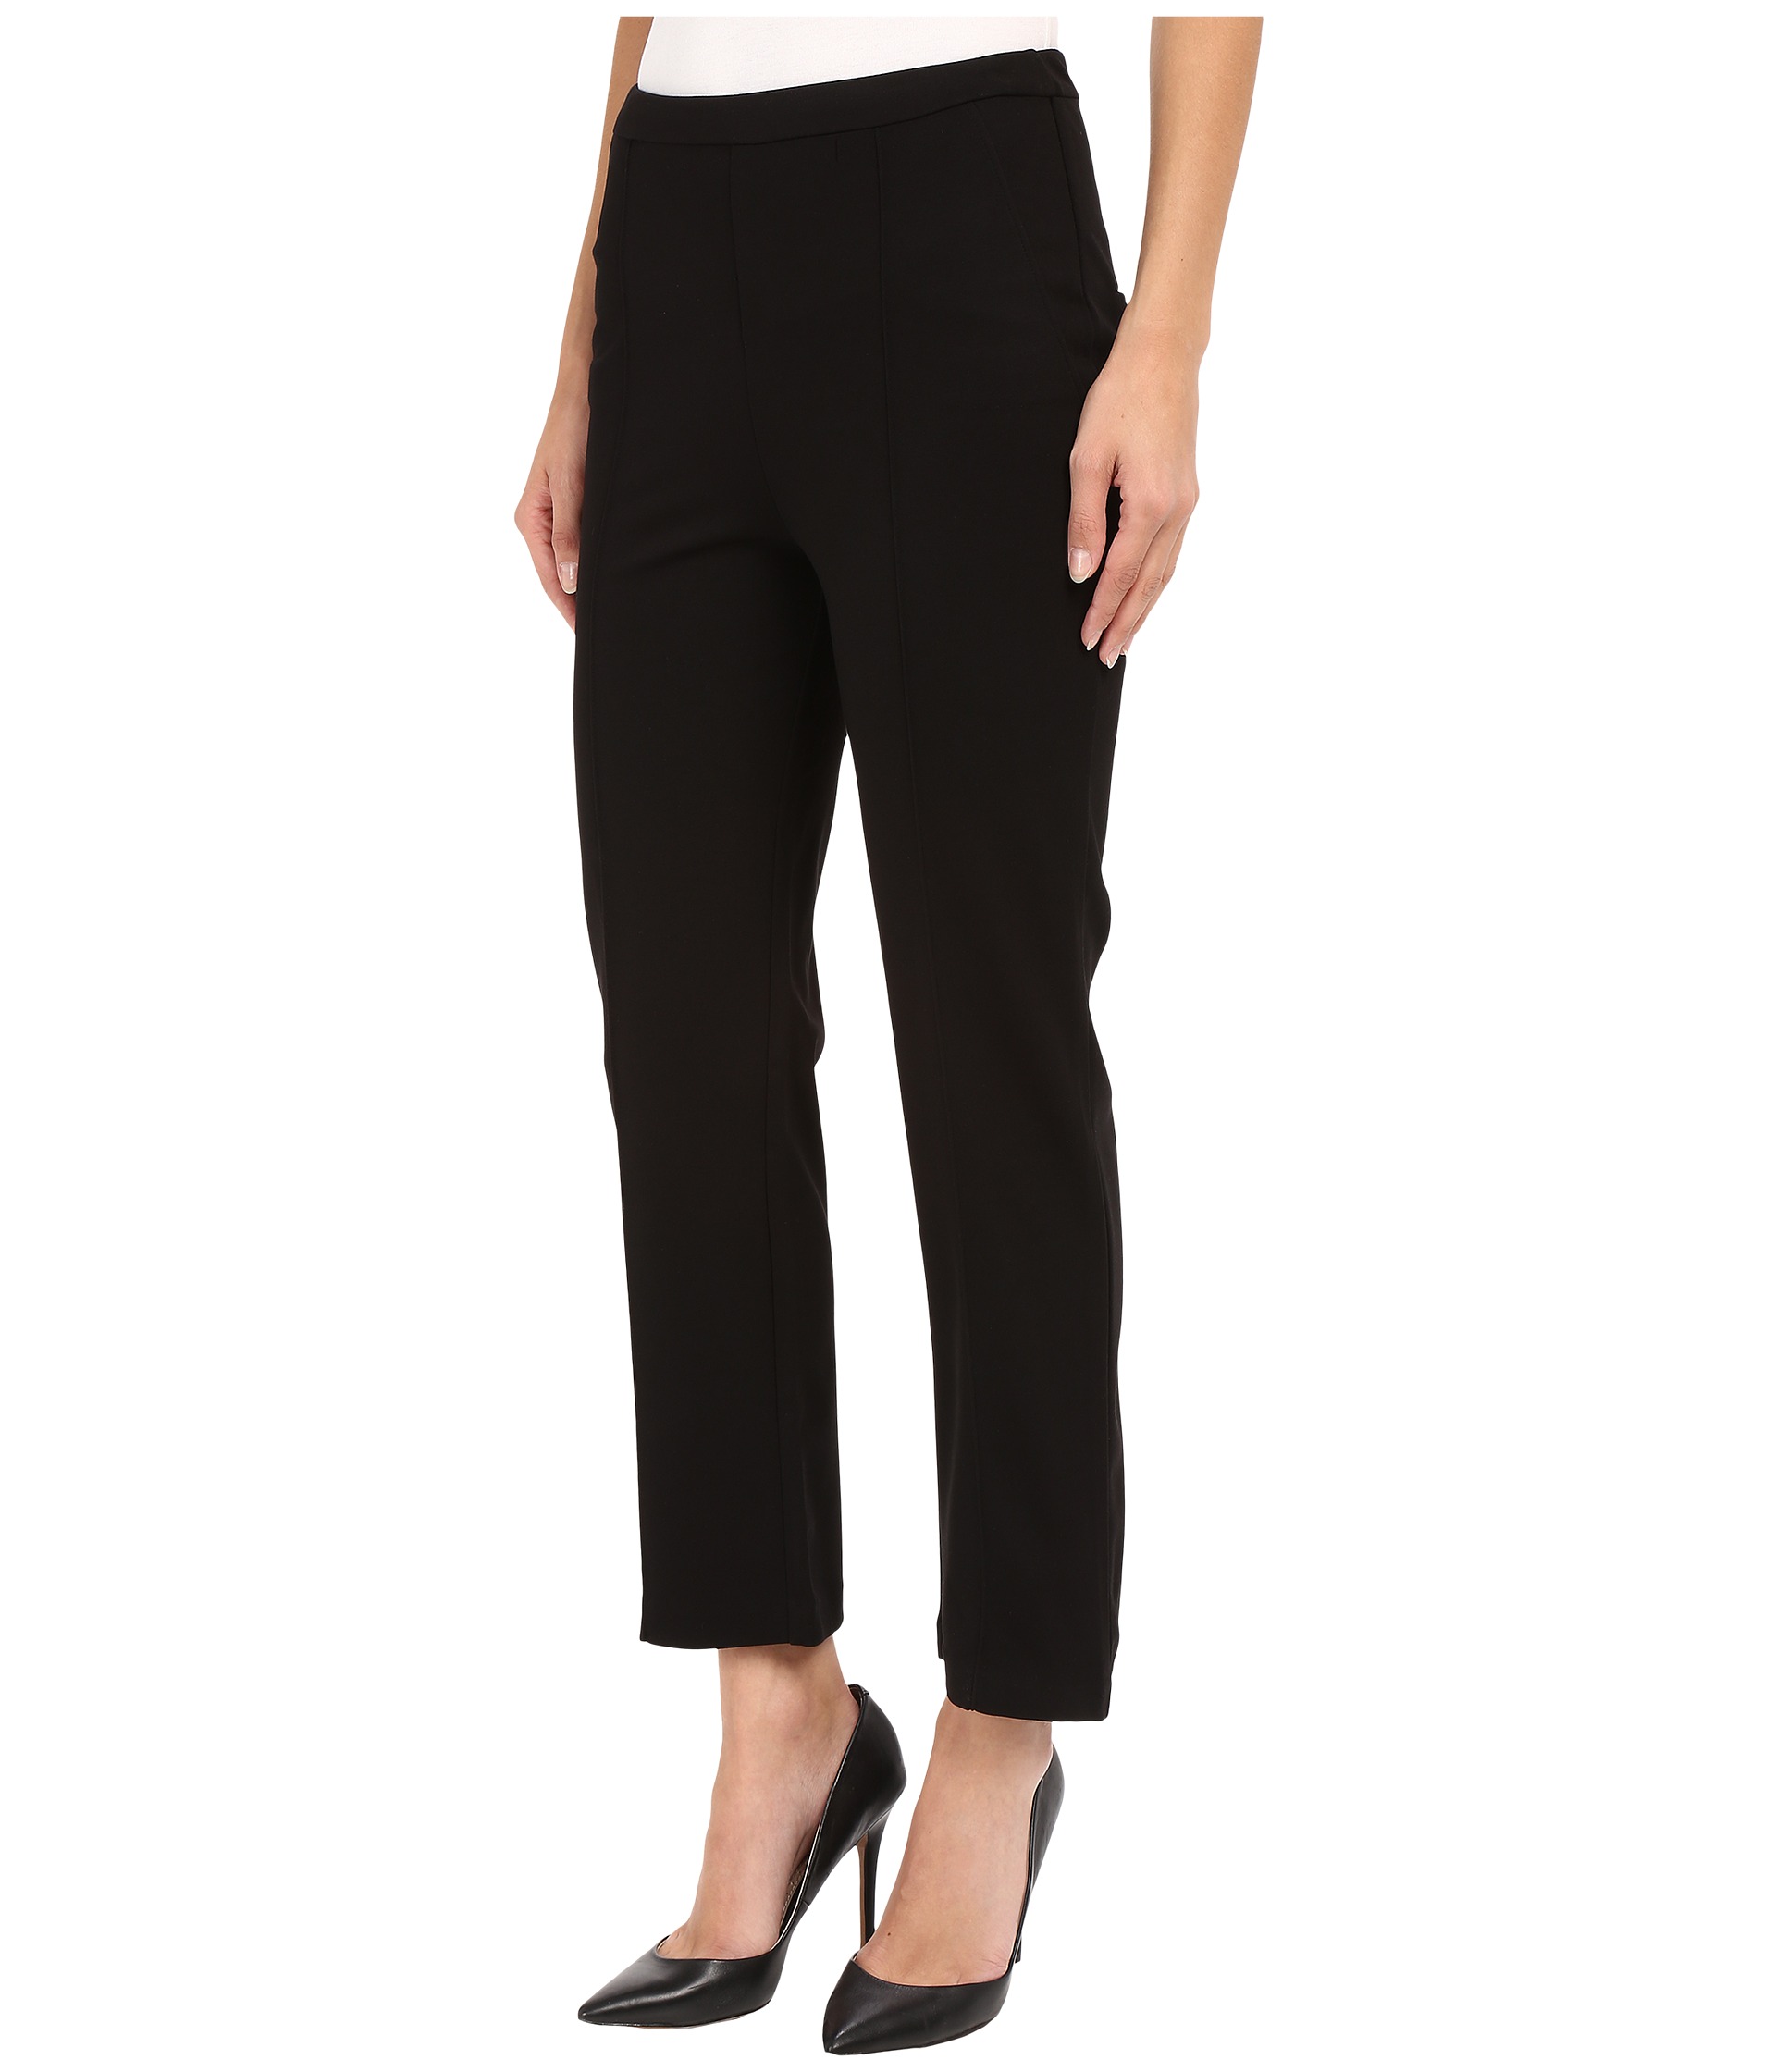 Lysse Ponte Crop Trousers at Zappos.com